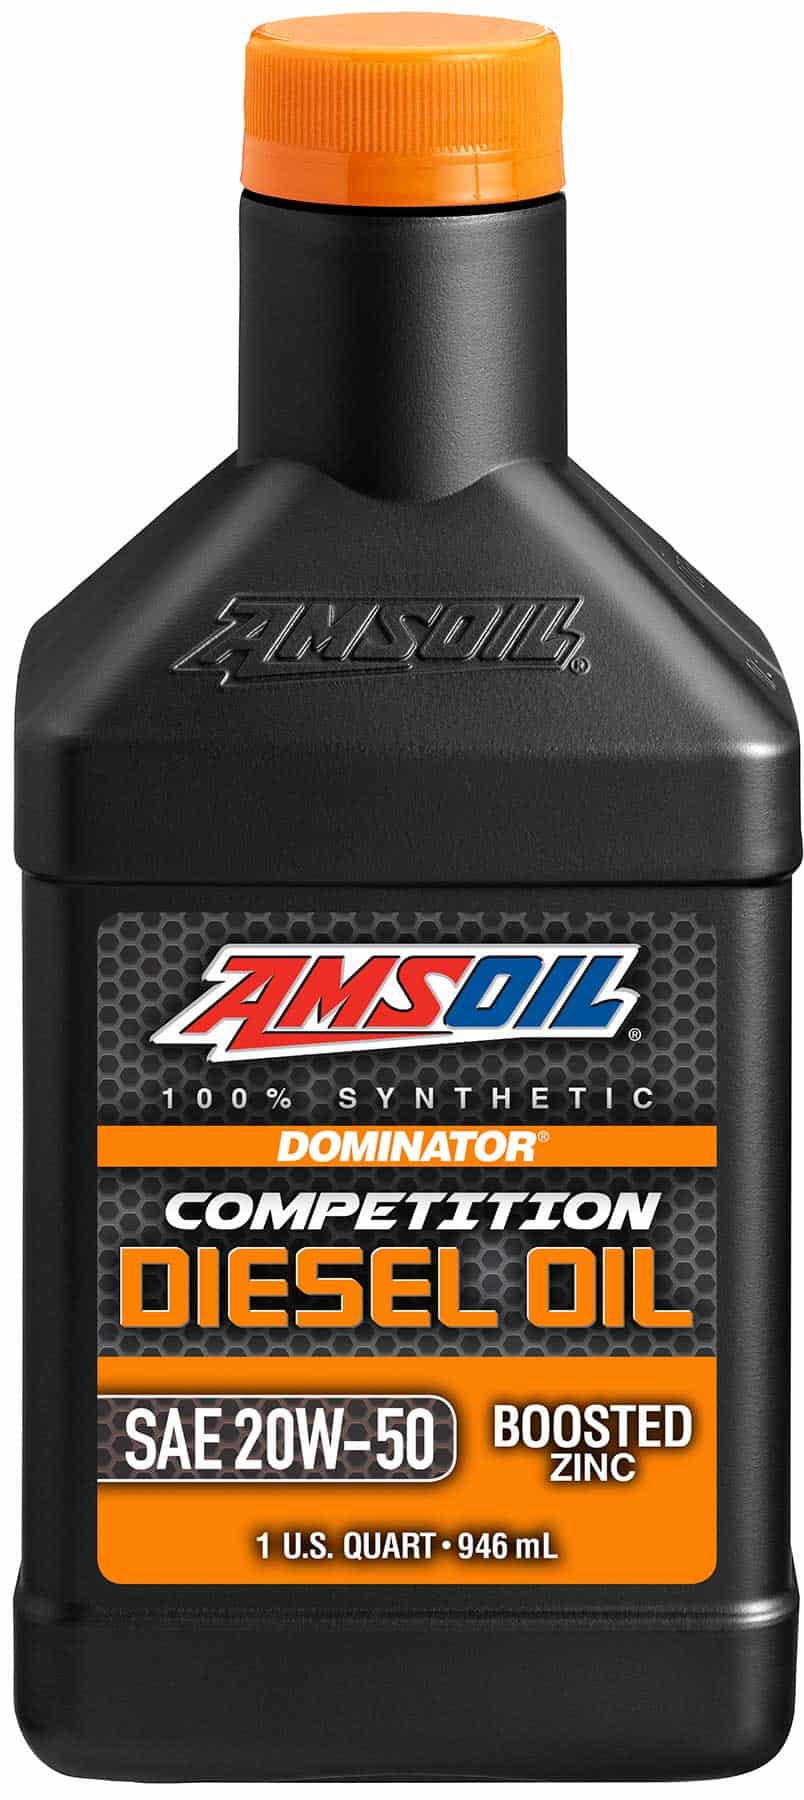 A bottle of AMSOIL DOMINATOR® Competition Diesel Oil, designed for professionals and enthusiasts who want a step up in diesel protection.